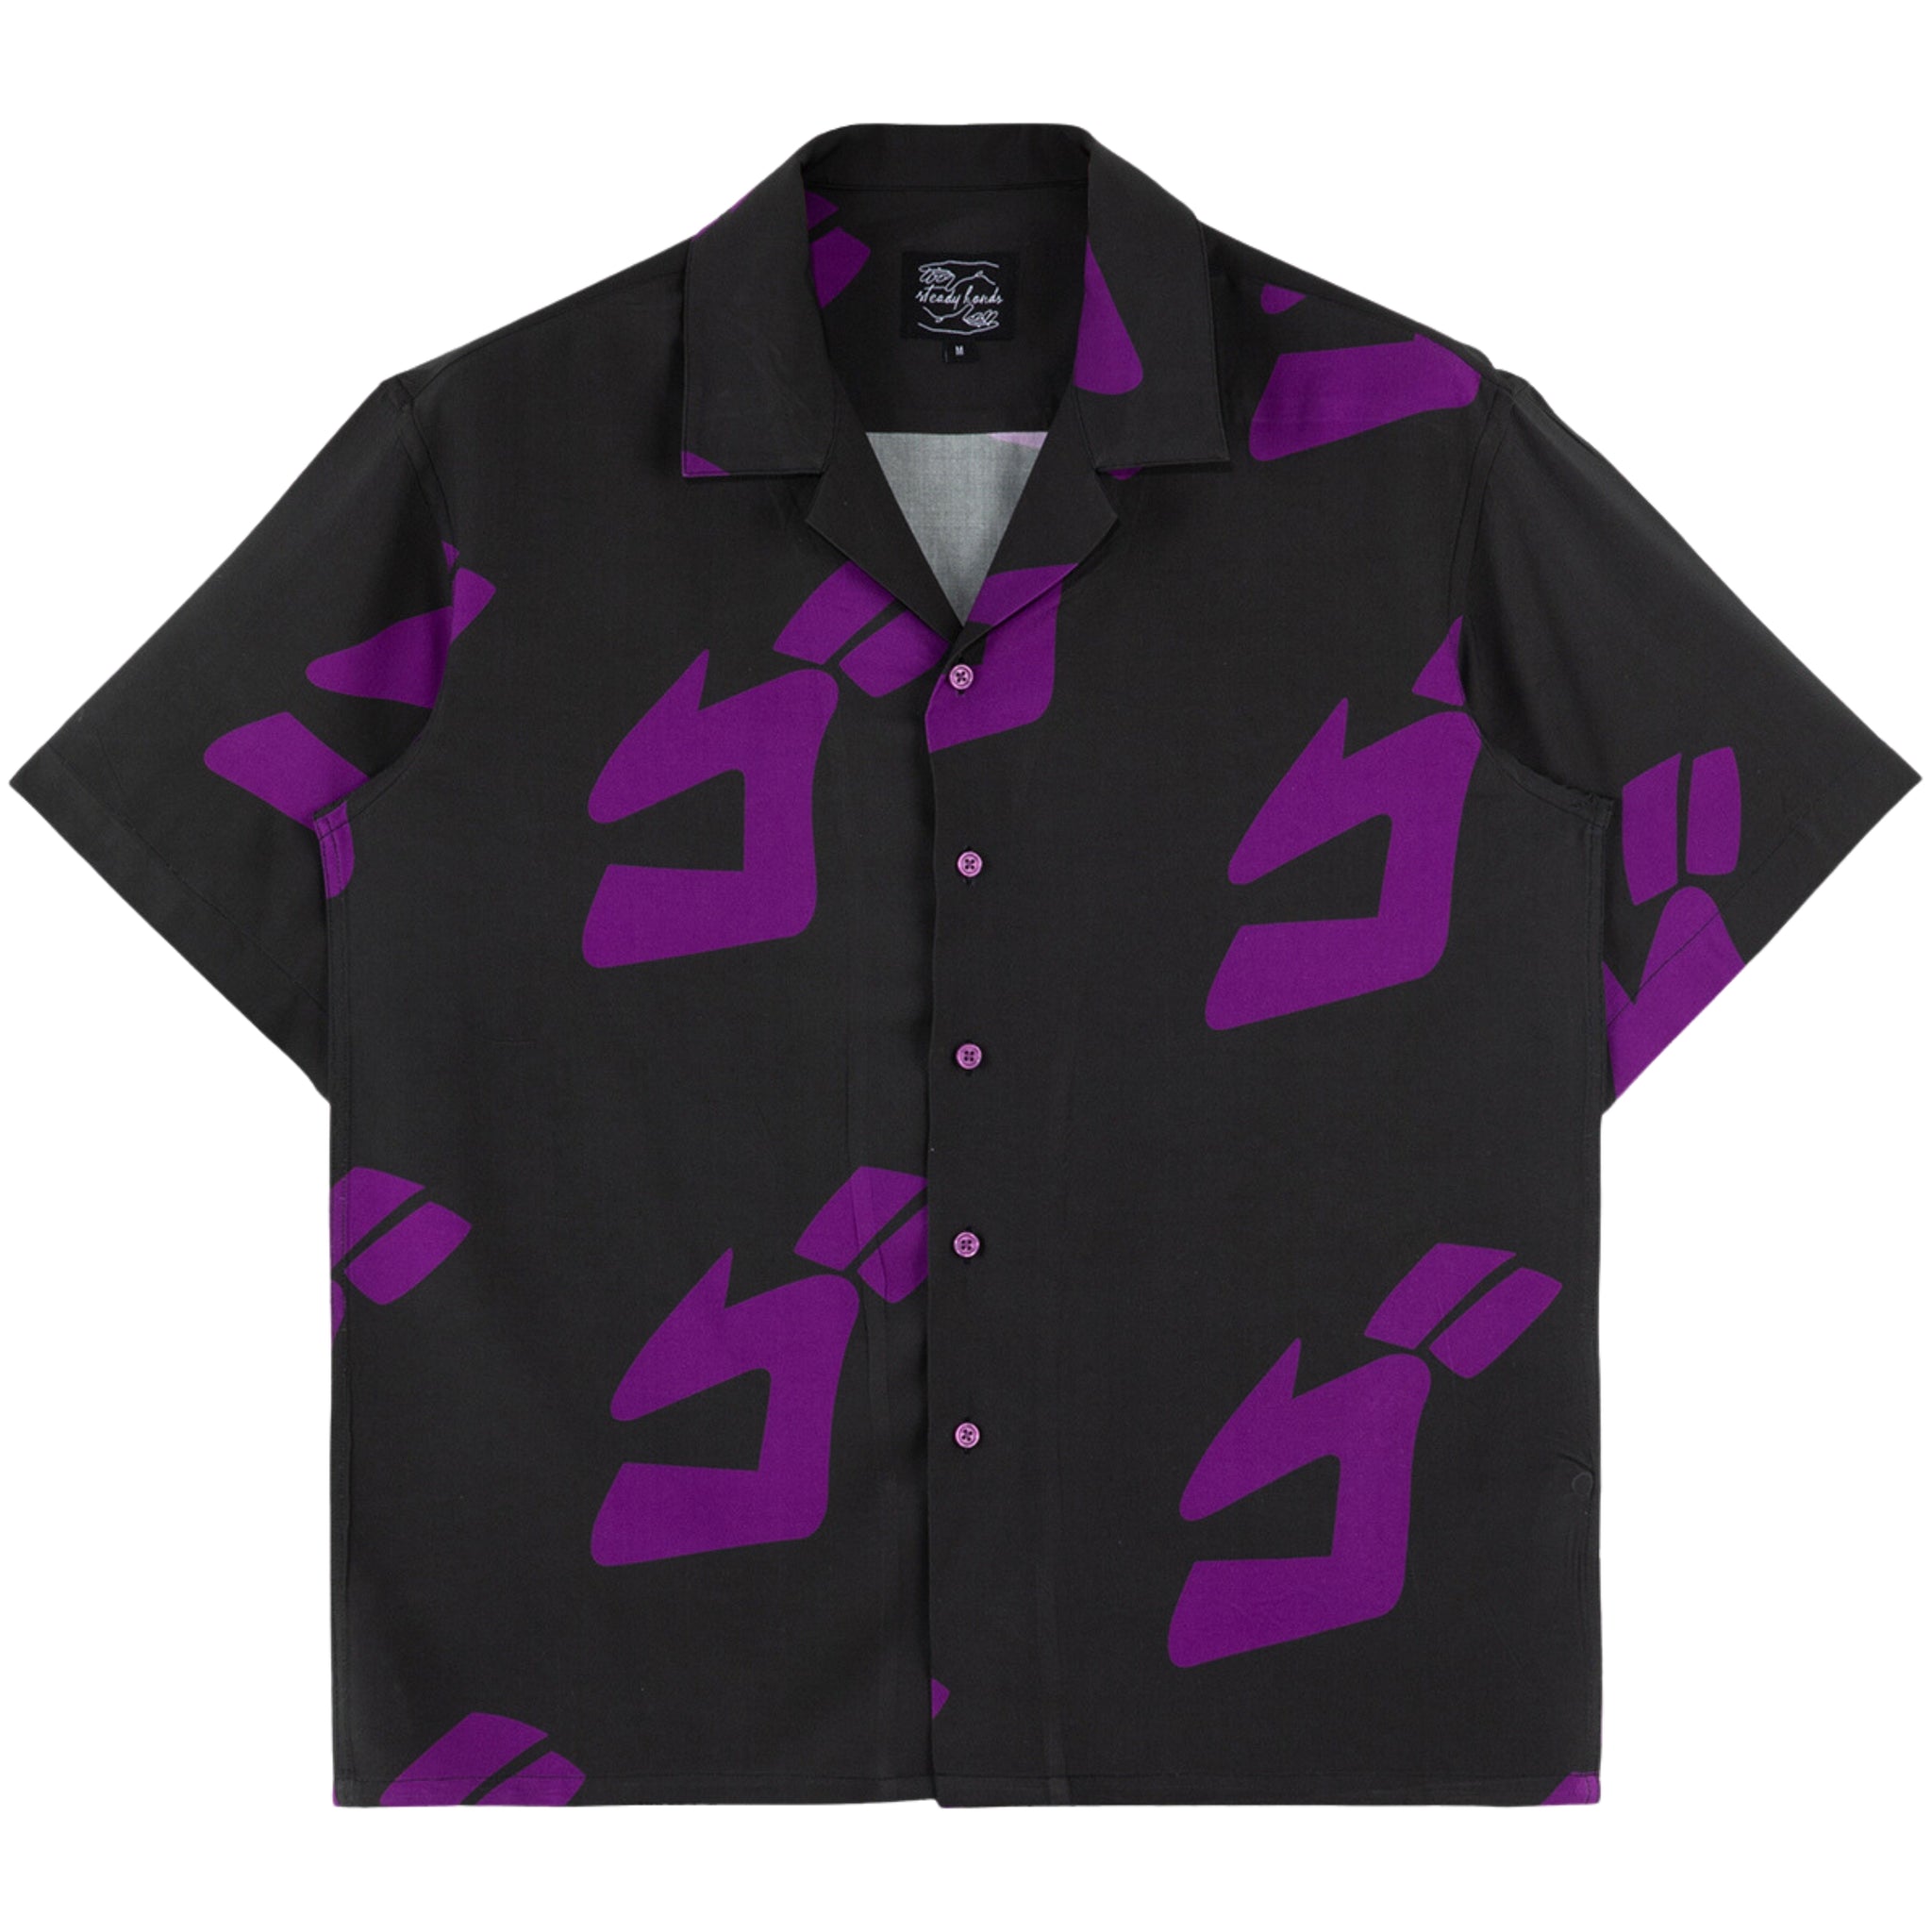 Menacing Button Up – Steady Hands